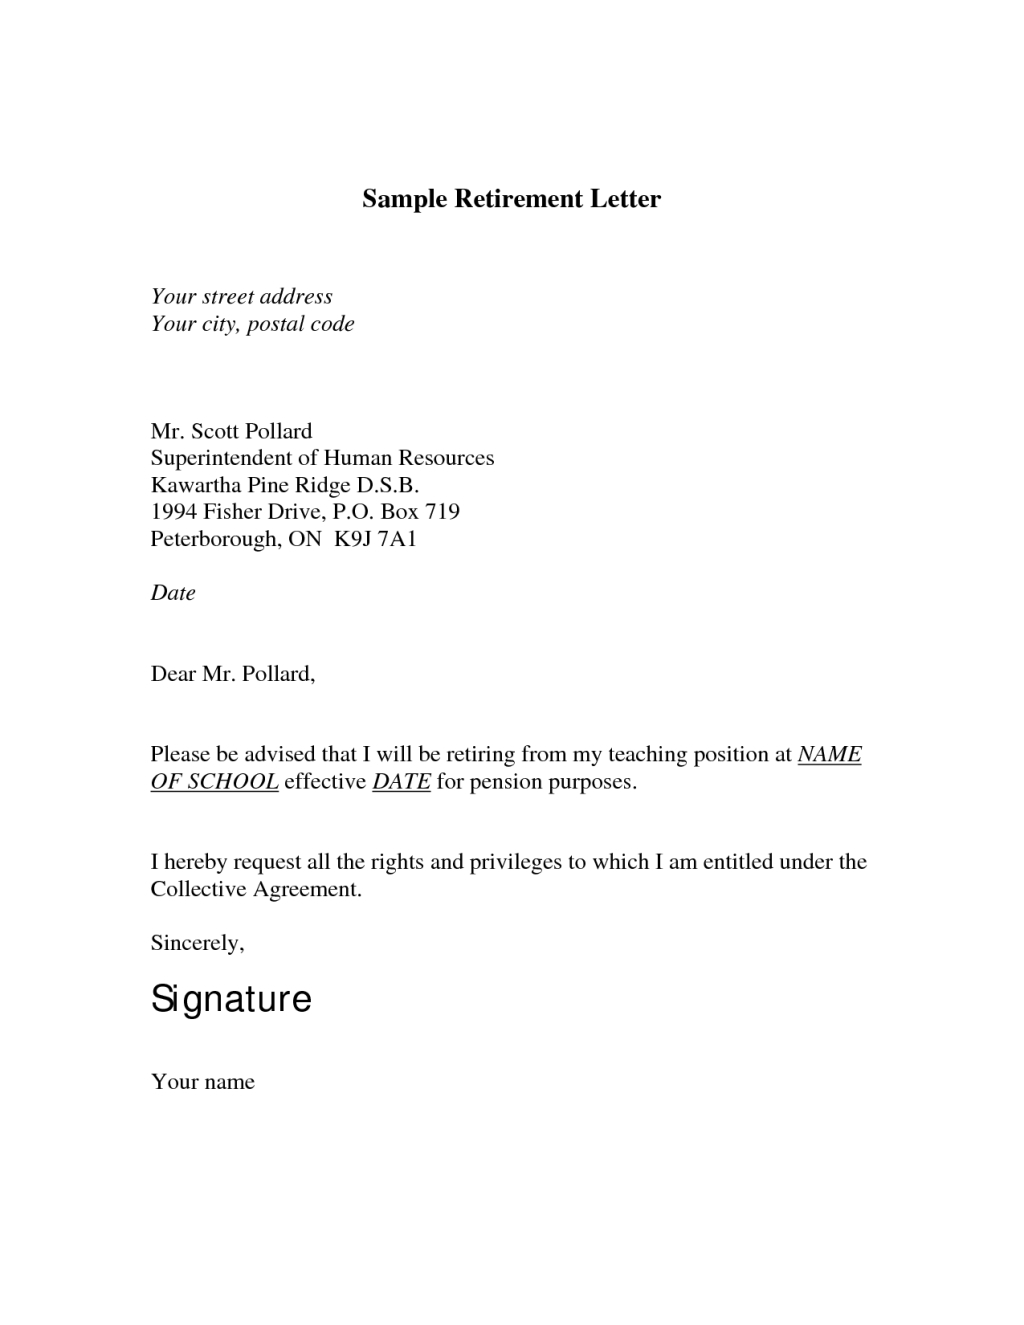 Letter Of Intent to Retire Template - Letter Intent to Retire From Teaching Deped Sample Teacher Free